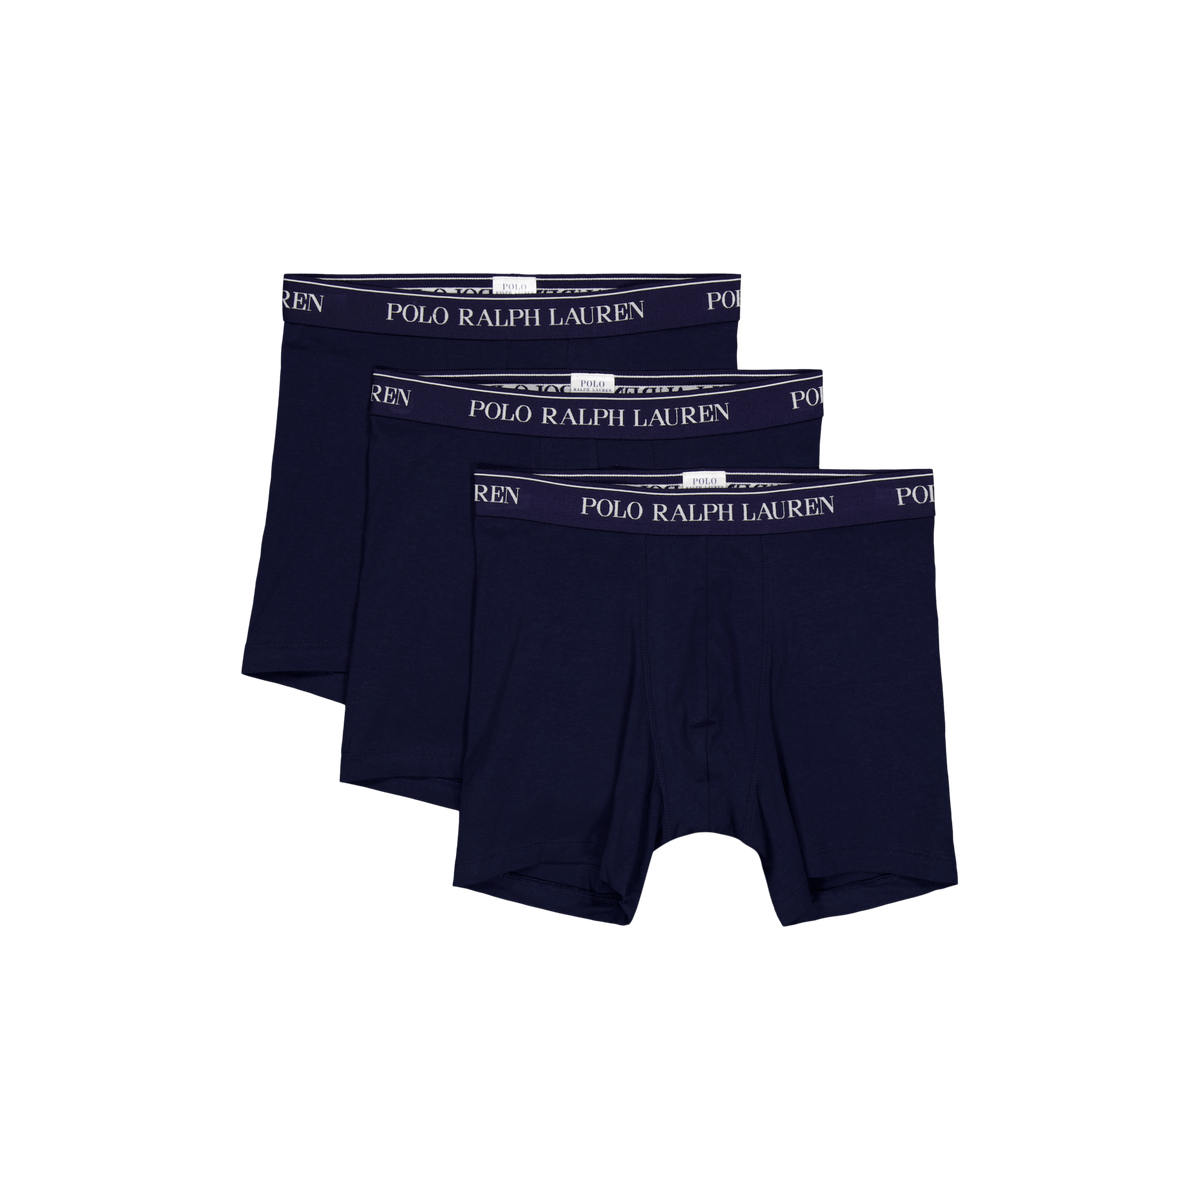 Polo Ralph Lauren 3-pack Boxer Brief 001 Cr Nvy/cr Nvy/ Cr Nvy